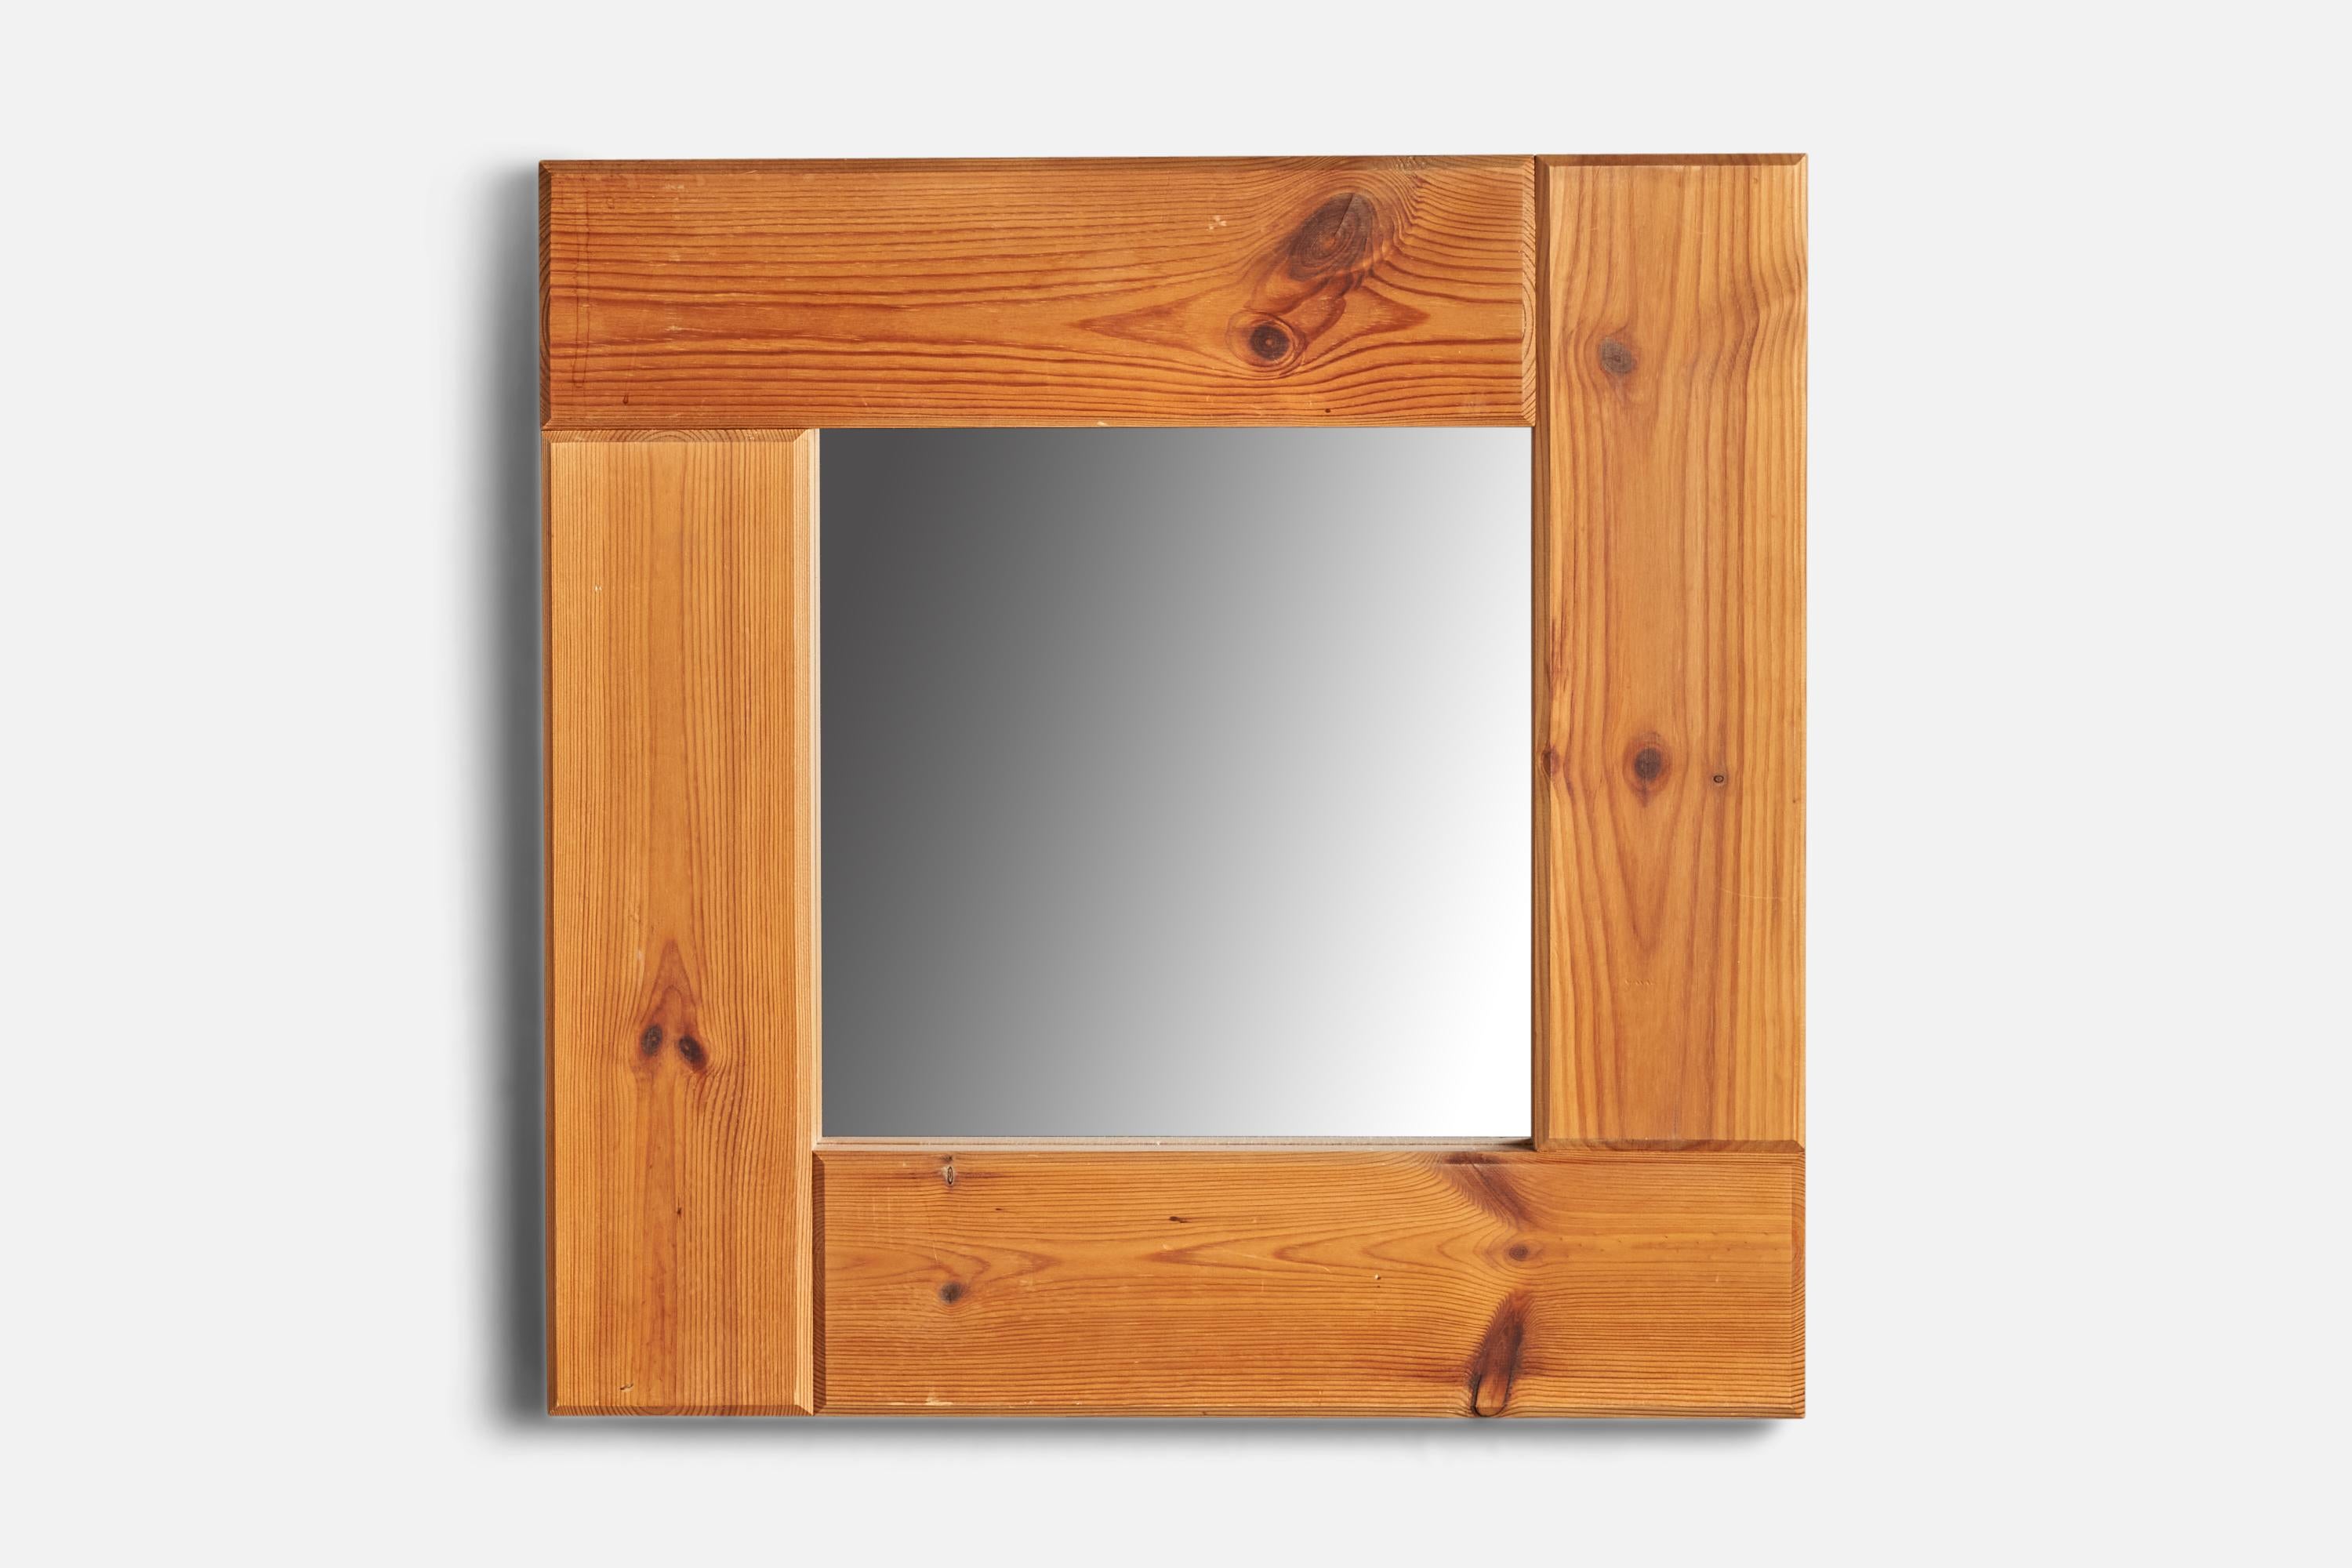 A pine wall mirror designed and produced in Sweden, 1970s.